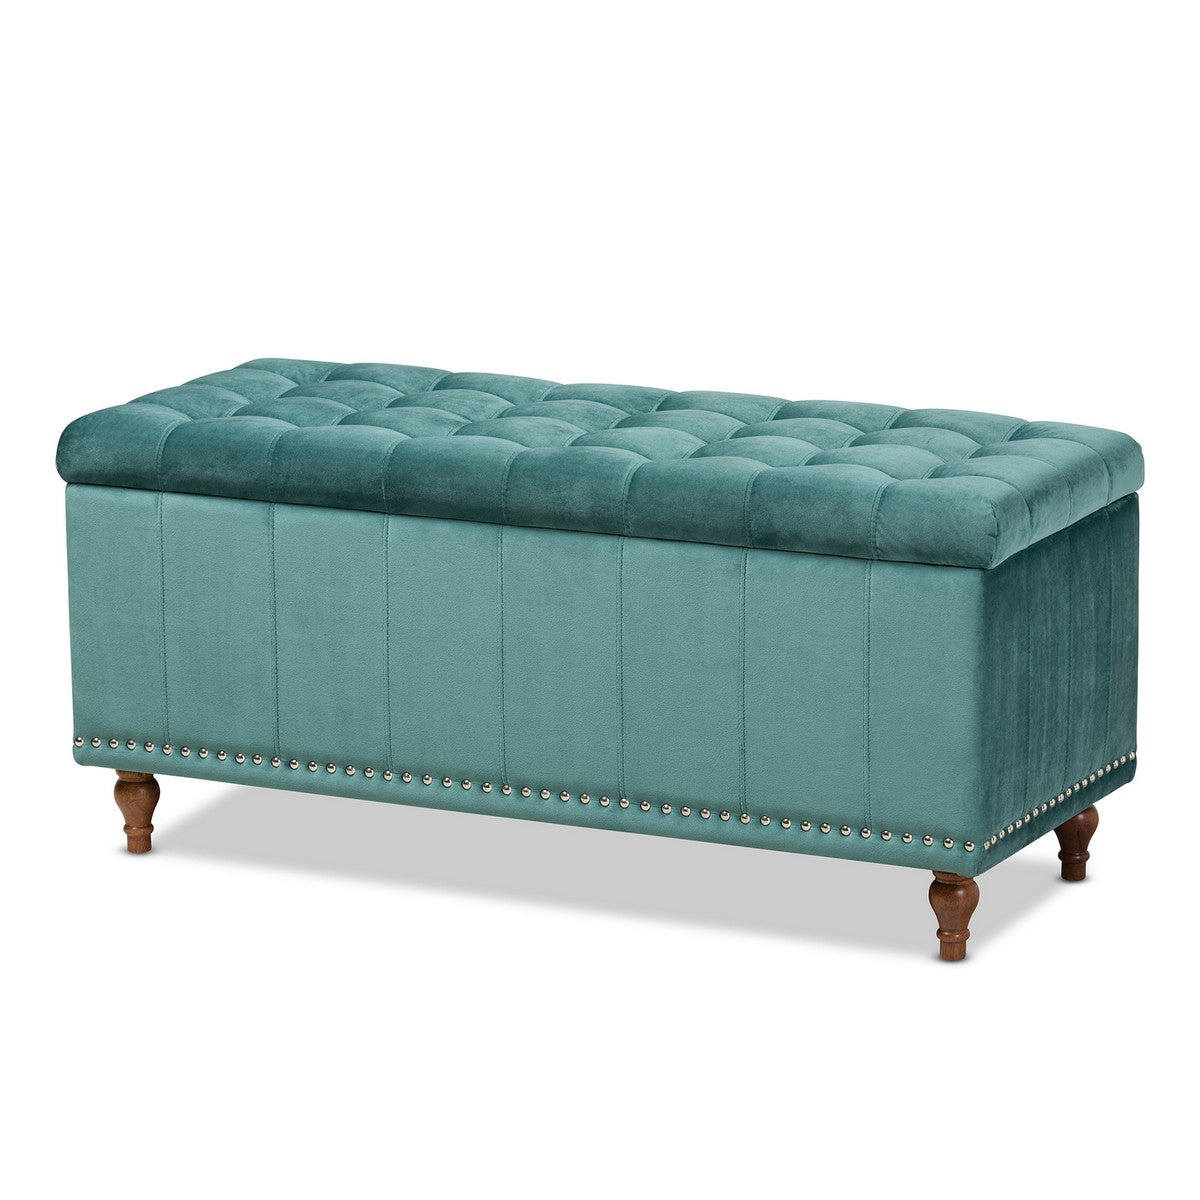 Baxton Studio Kaylee Modern and Contemporary Teal Blue Velvet Fabric Upholstered Button-Tufted Storage Ottoman Bench Baxton Studio- Ottomans-Minimal And Modern - 1